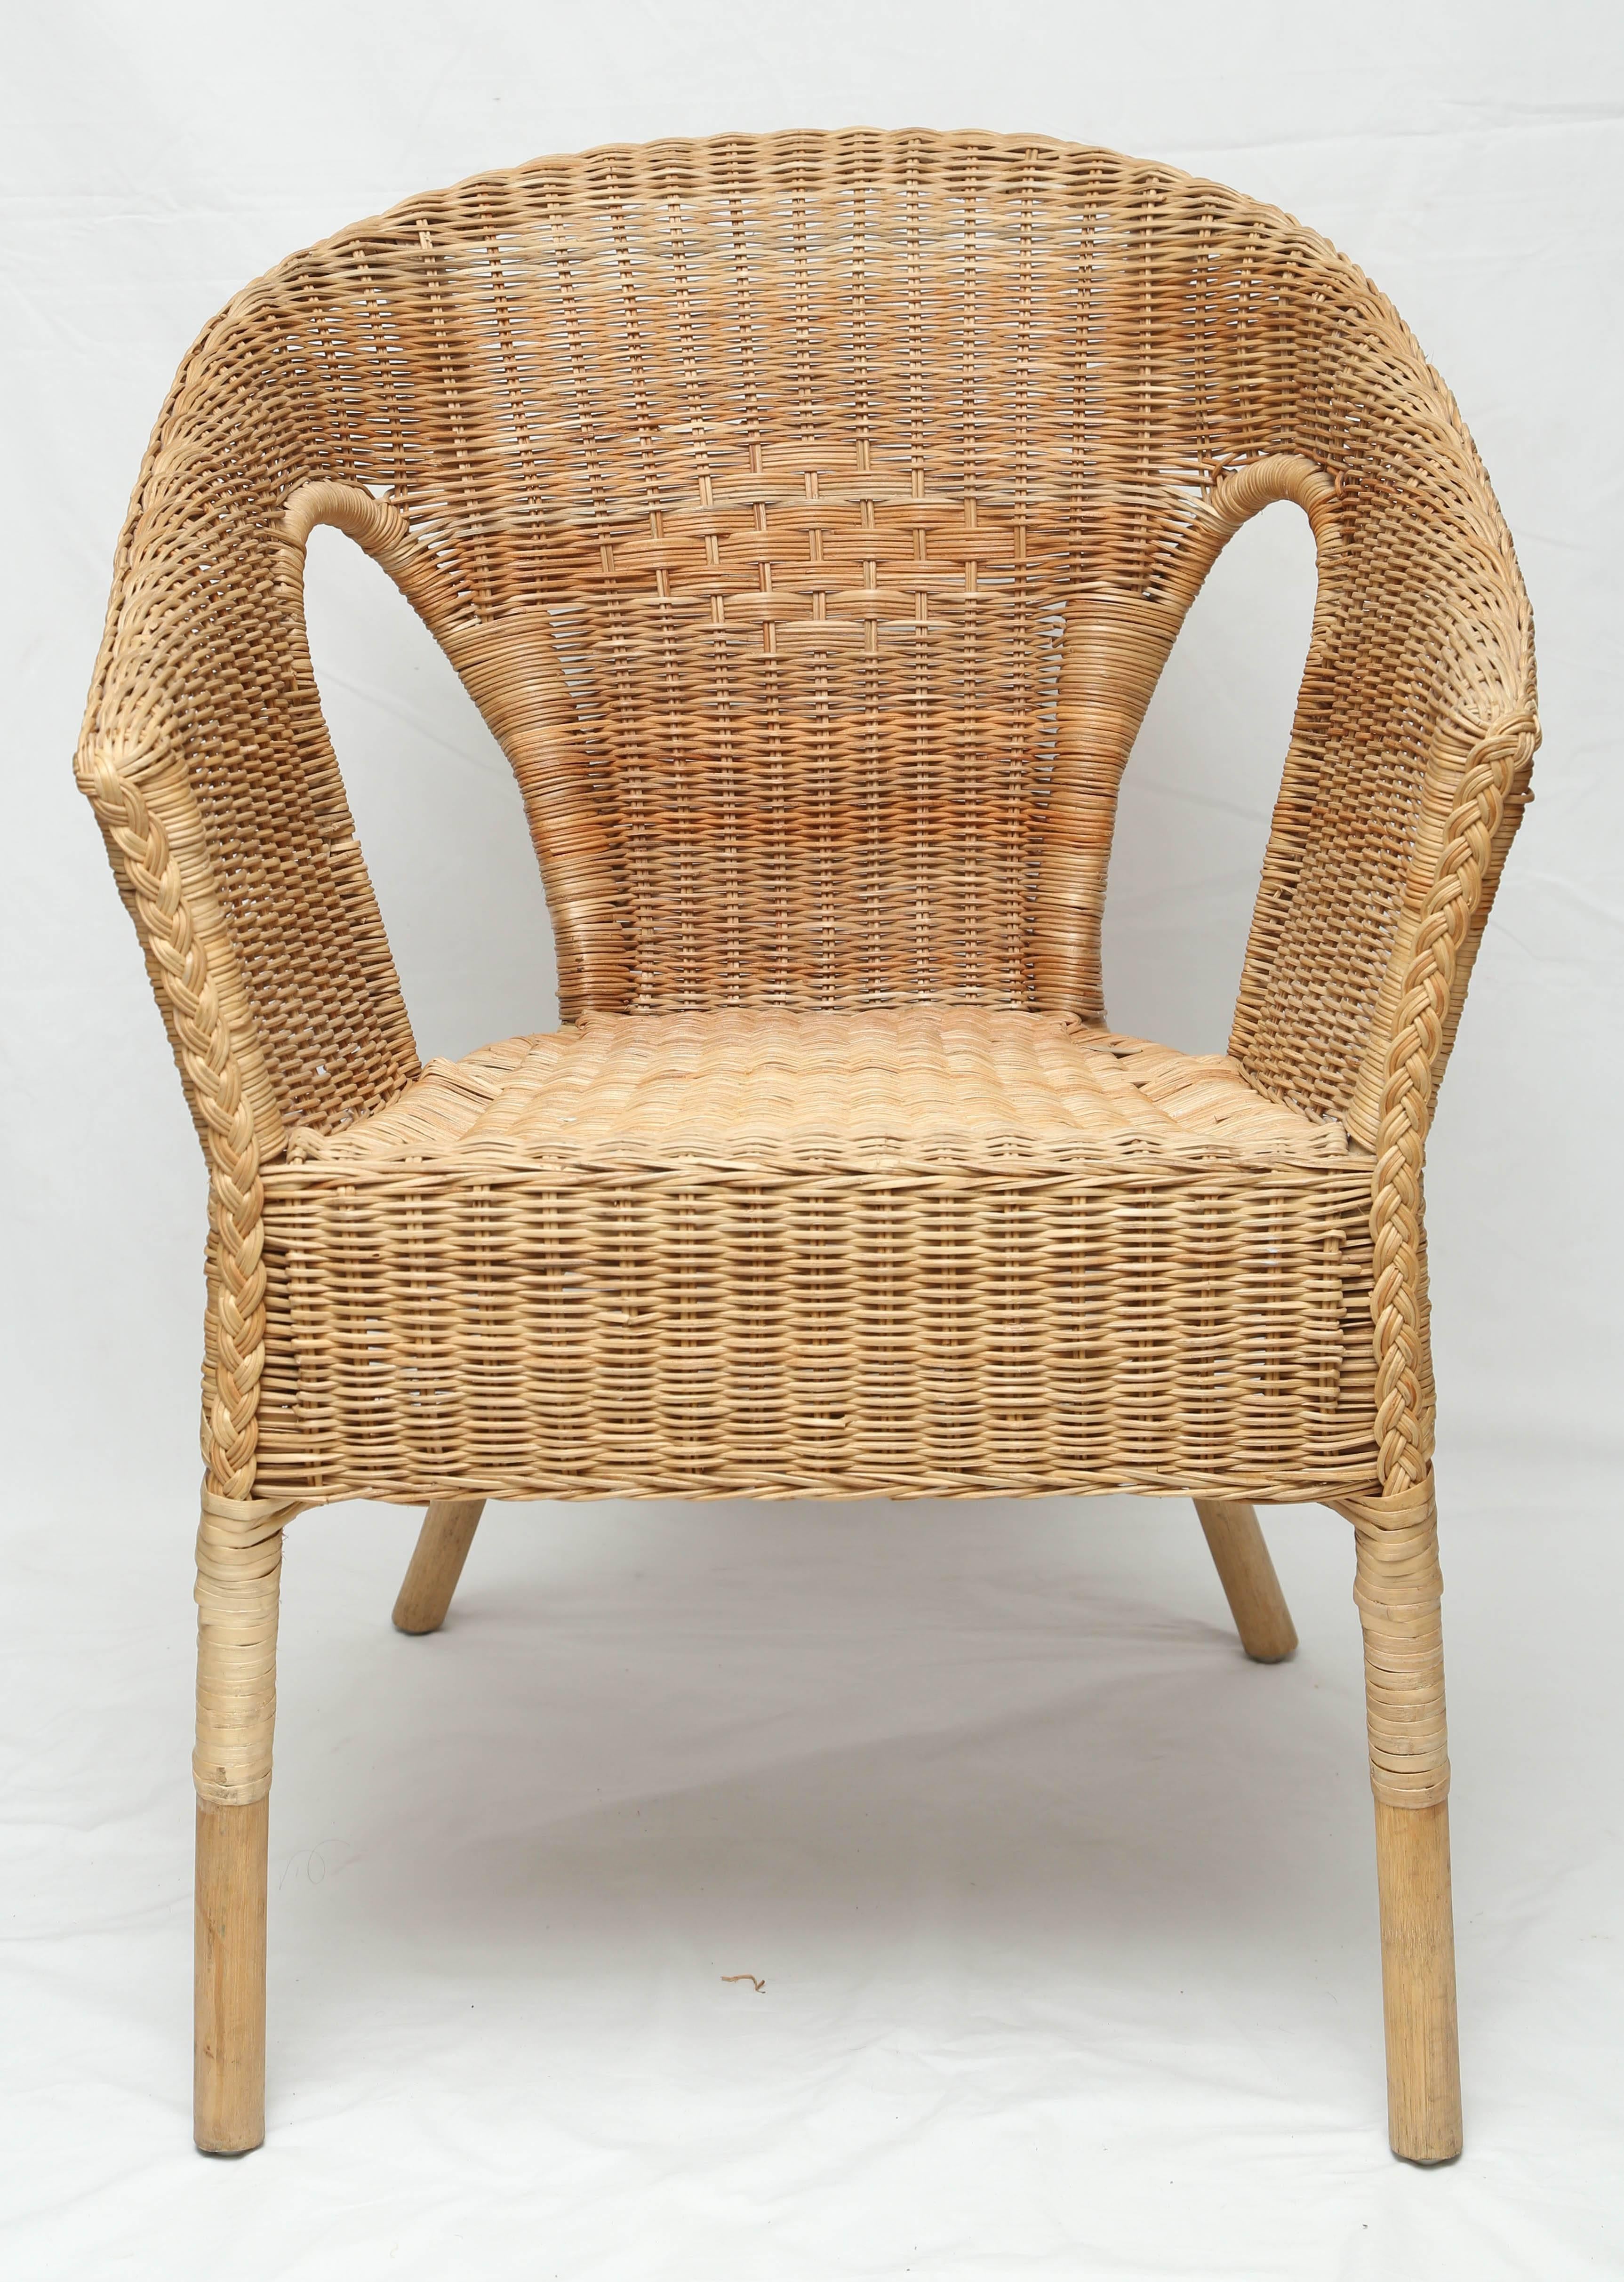 Very unusual pair of French vintage rattan chairs.